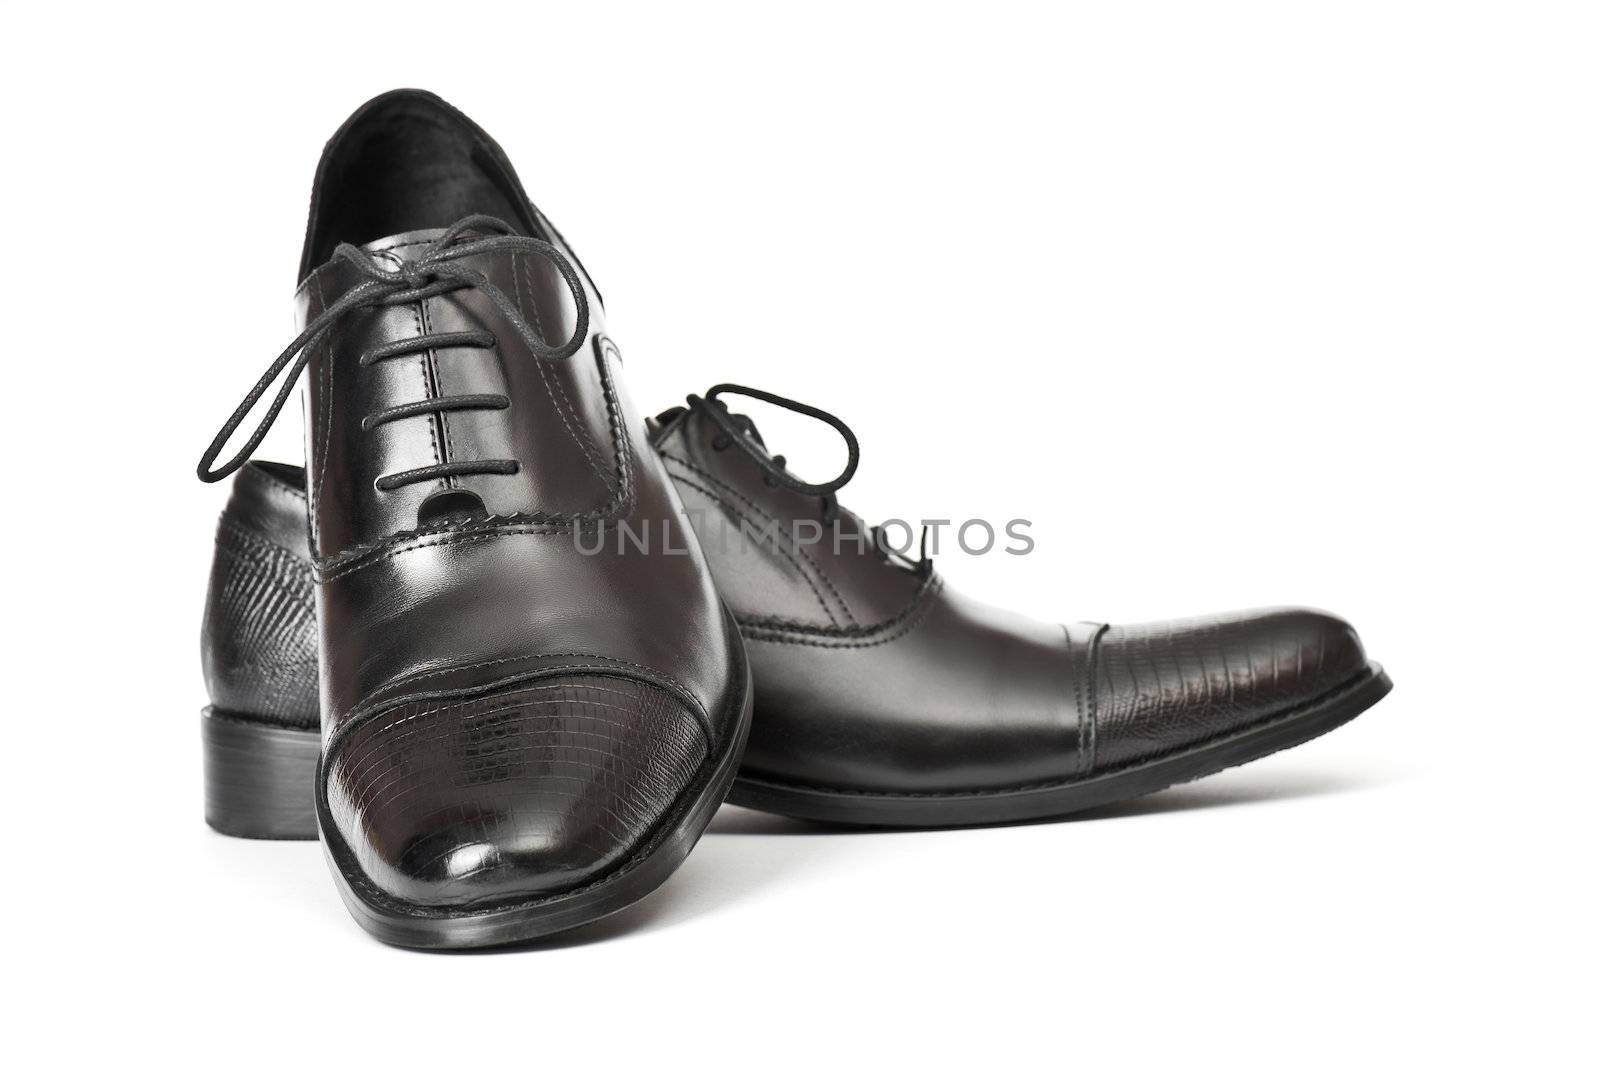 Close-up of elegant mens shoes on white background